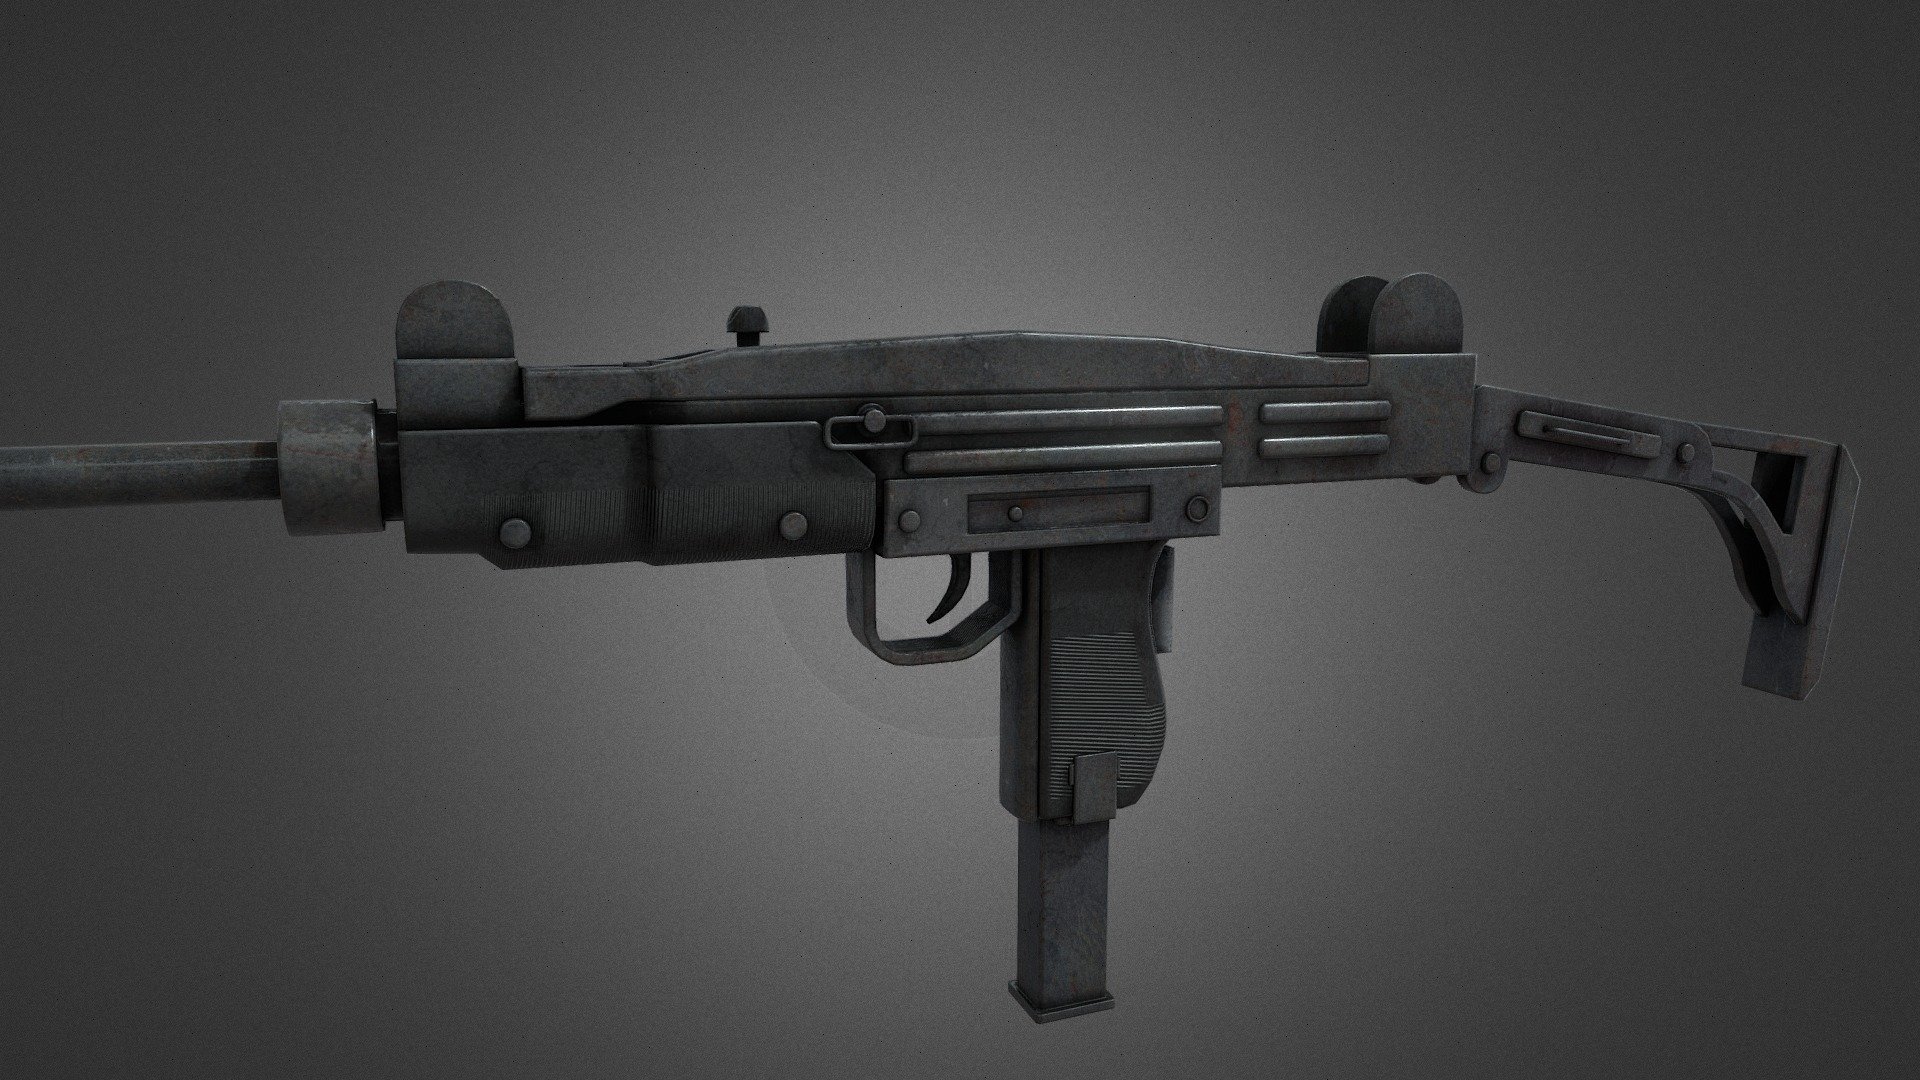 Israeli gun UZI, developed in 1948 and used by various countries to this day. this early full-size version, there are also mini and micro versions. this model has a magazine for 40 rounds, there are also options for 20,32,50,62. texture resolution 4K.

Израильский пистолет пулемёт УЗИ (UZI), разработан в 1948г и используется различными странами до сих пор.
это ранняя полноразмерная версия, существуюют ещё мини и микро версии.
у данной модели магазин на 40 патронов, существуют ещё варианты на 20,32,50,62.
разрешение текстур 4К.

I know how to use a translator, so everyone come in discord - https://discord.gg/hzwvJrwtqm

и славяно-арийская телега https://t.me/perdole1kurwa - Uzi - Download Free 3D model by buh (@buh-late) 3d model